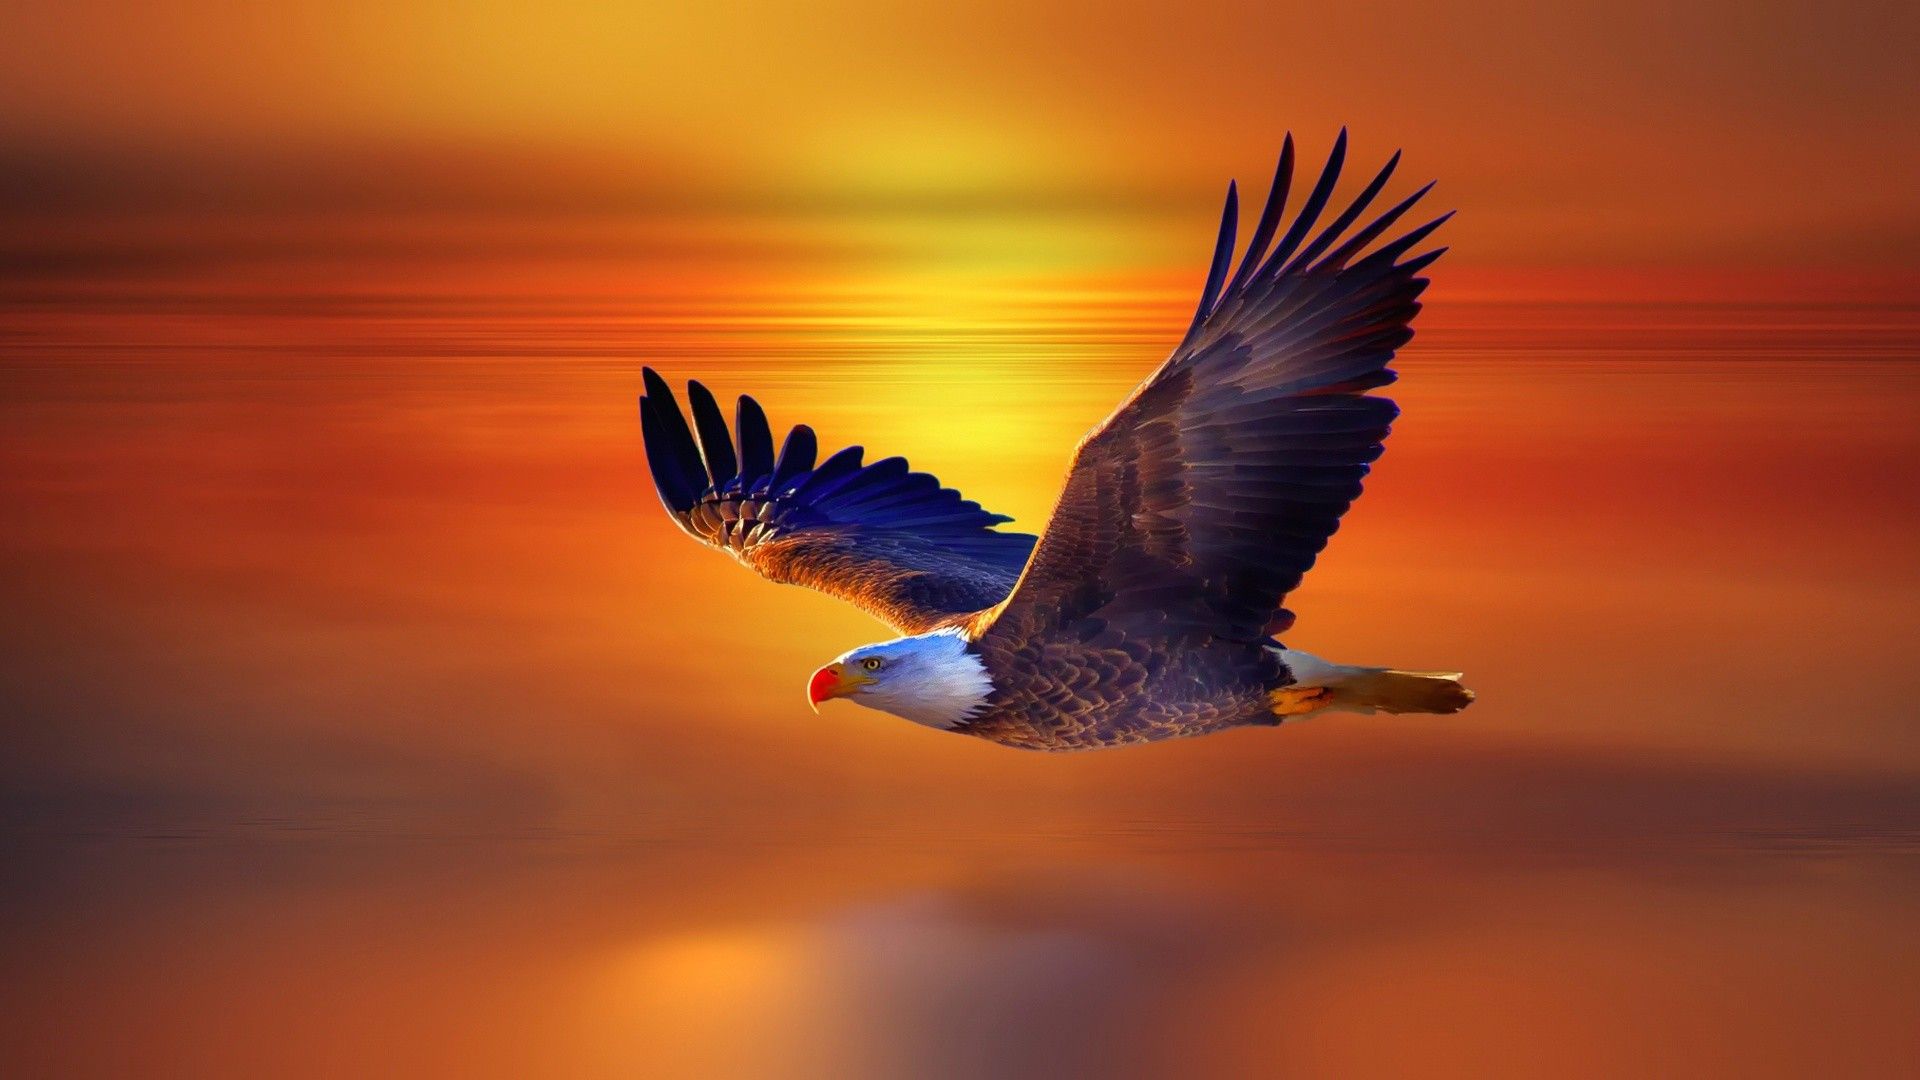 Download Eagle Wallpaper Free #3wmlq » hdxwallpaperz.com